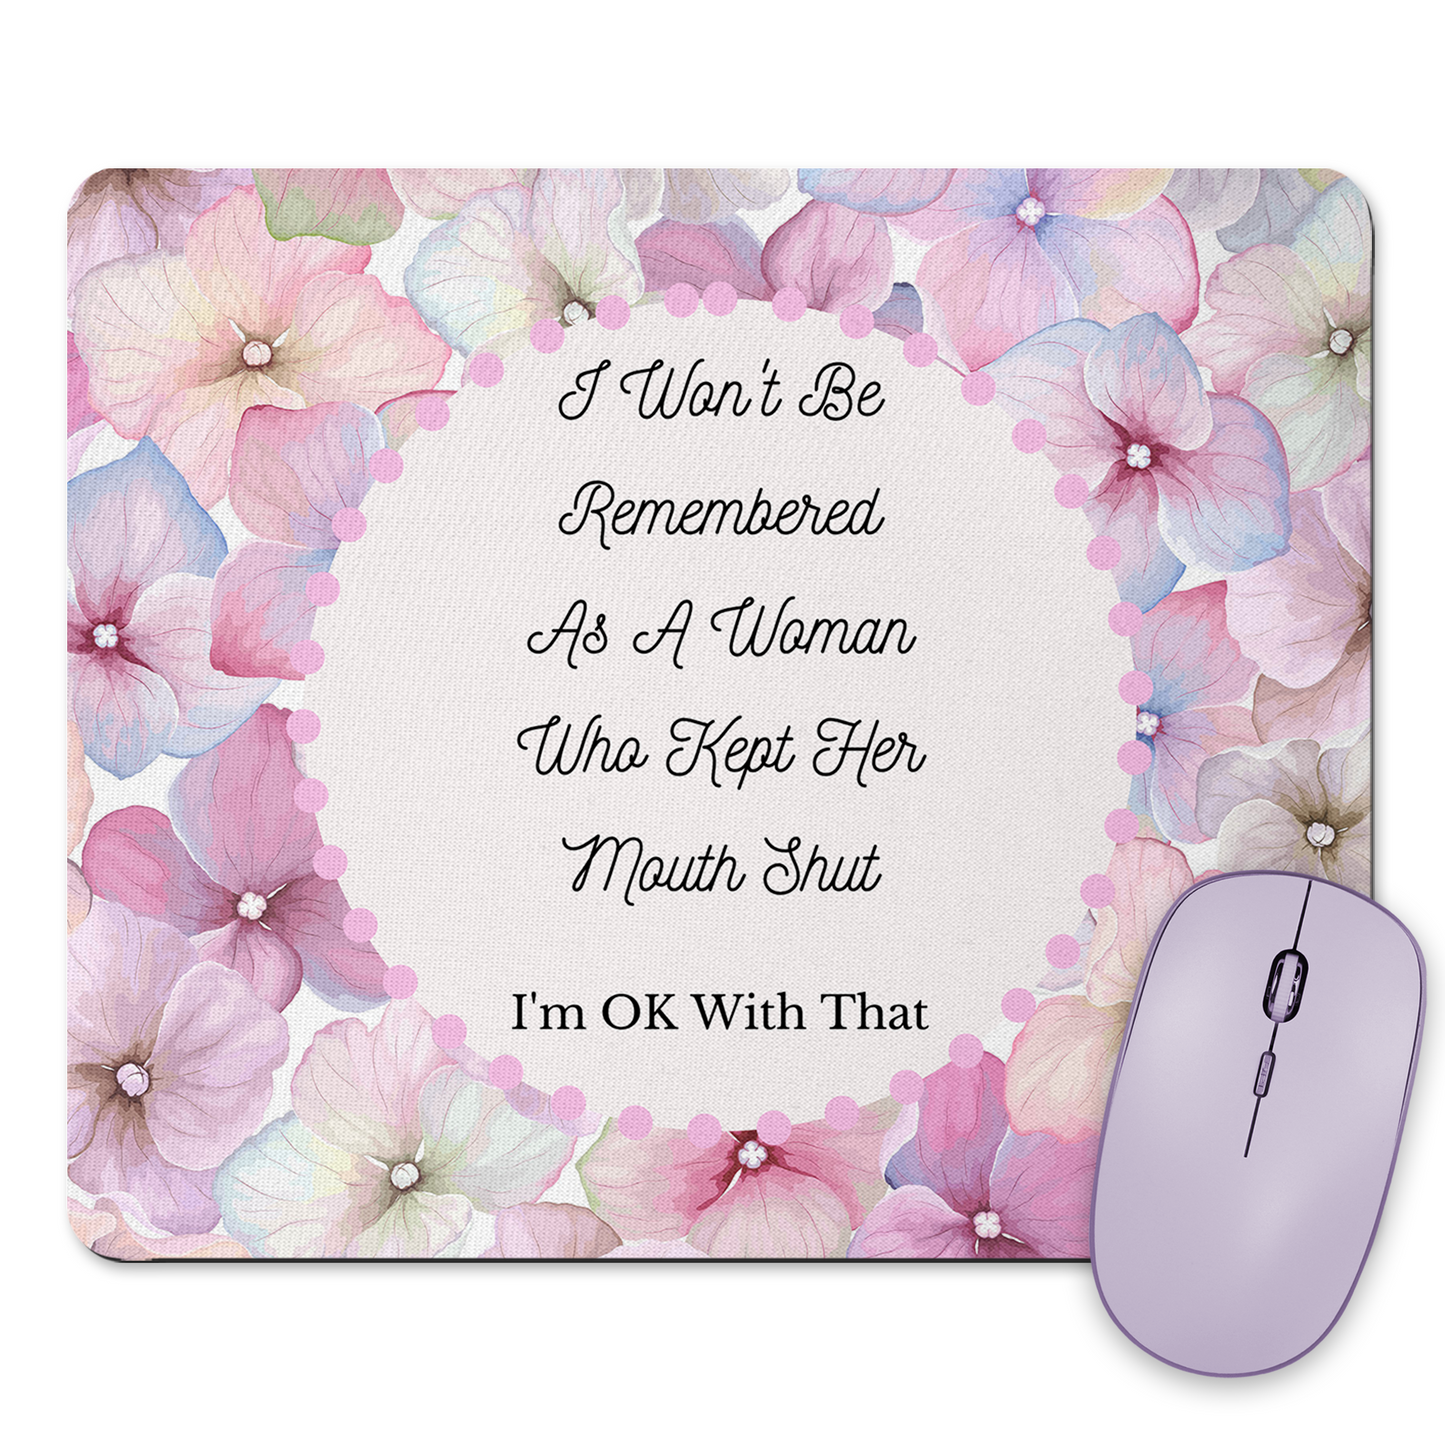 Woman Who Didn't Keep Her Mouth Shut Mousepad & Coaster Set